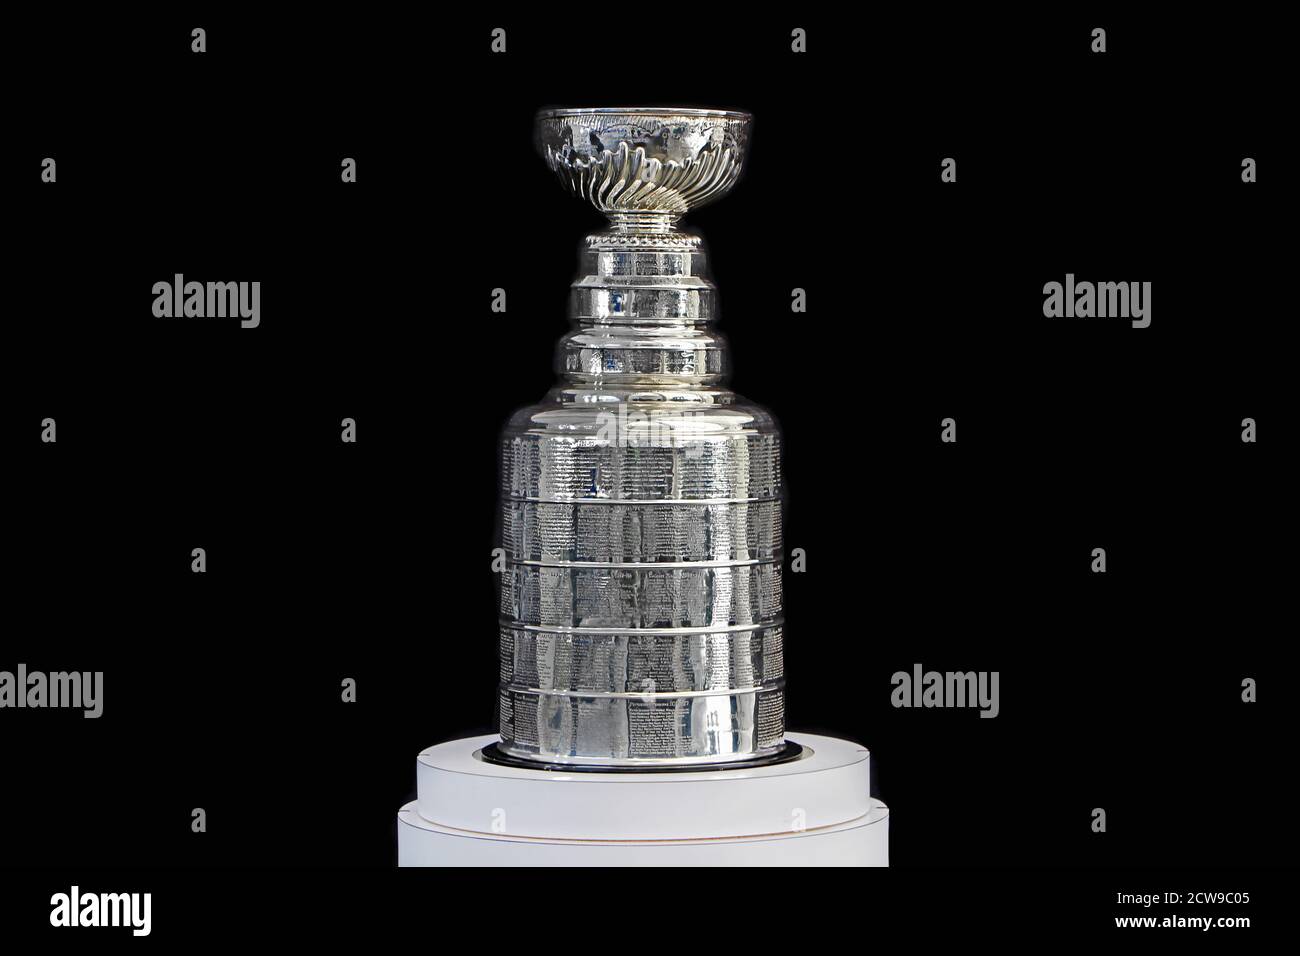 NHL Trophy - Silver Stanley Cup on white stand with black background, in Vancouver, BC on October 22, 2017 Stock Photo